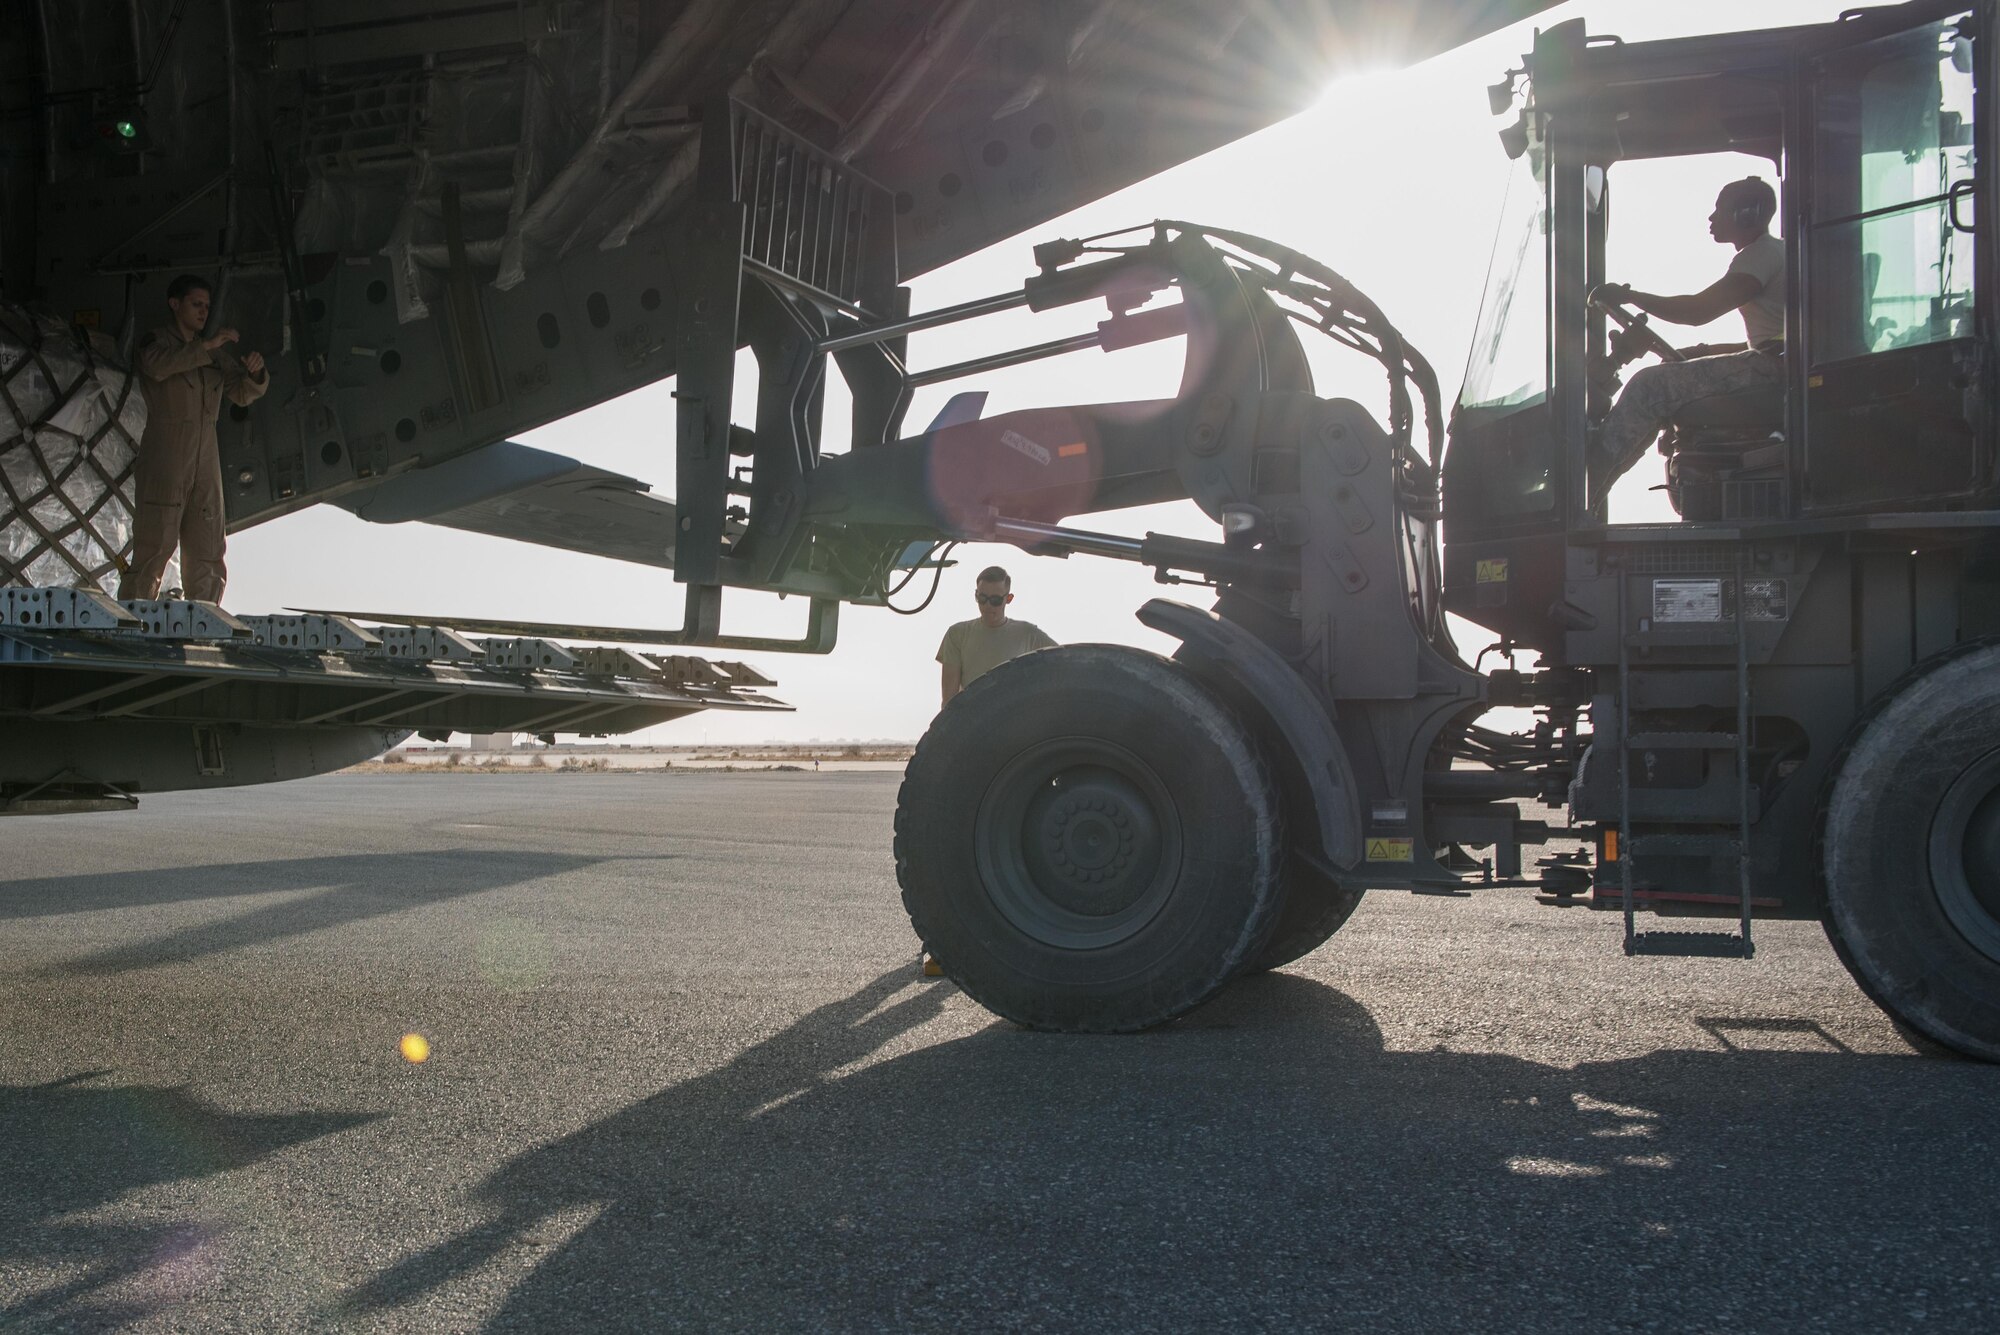 Airmen from the 407th Expeditionary Logistics Readiness Squadron and the 8th Airlift Squadron unload cargo from a C-17 Globemaster III from Joint Base Lewis-McChord, Wash., delivering supplies to the 407th Air Expeditionary Group Dec. 6, 2016, in preparation for the arrival of an F-16 squadron. An advanced team prepared the installation for the arrival of the fighter jets, enabling the squadron to begin combat missions within 24 hours of arrival. (U.S. Air Force photo/Master Sgt. Benjamin Wilson)(Released)